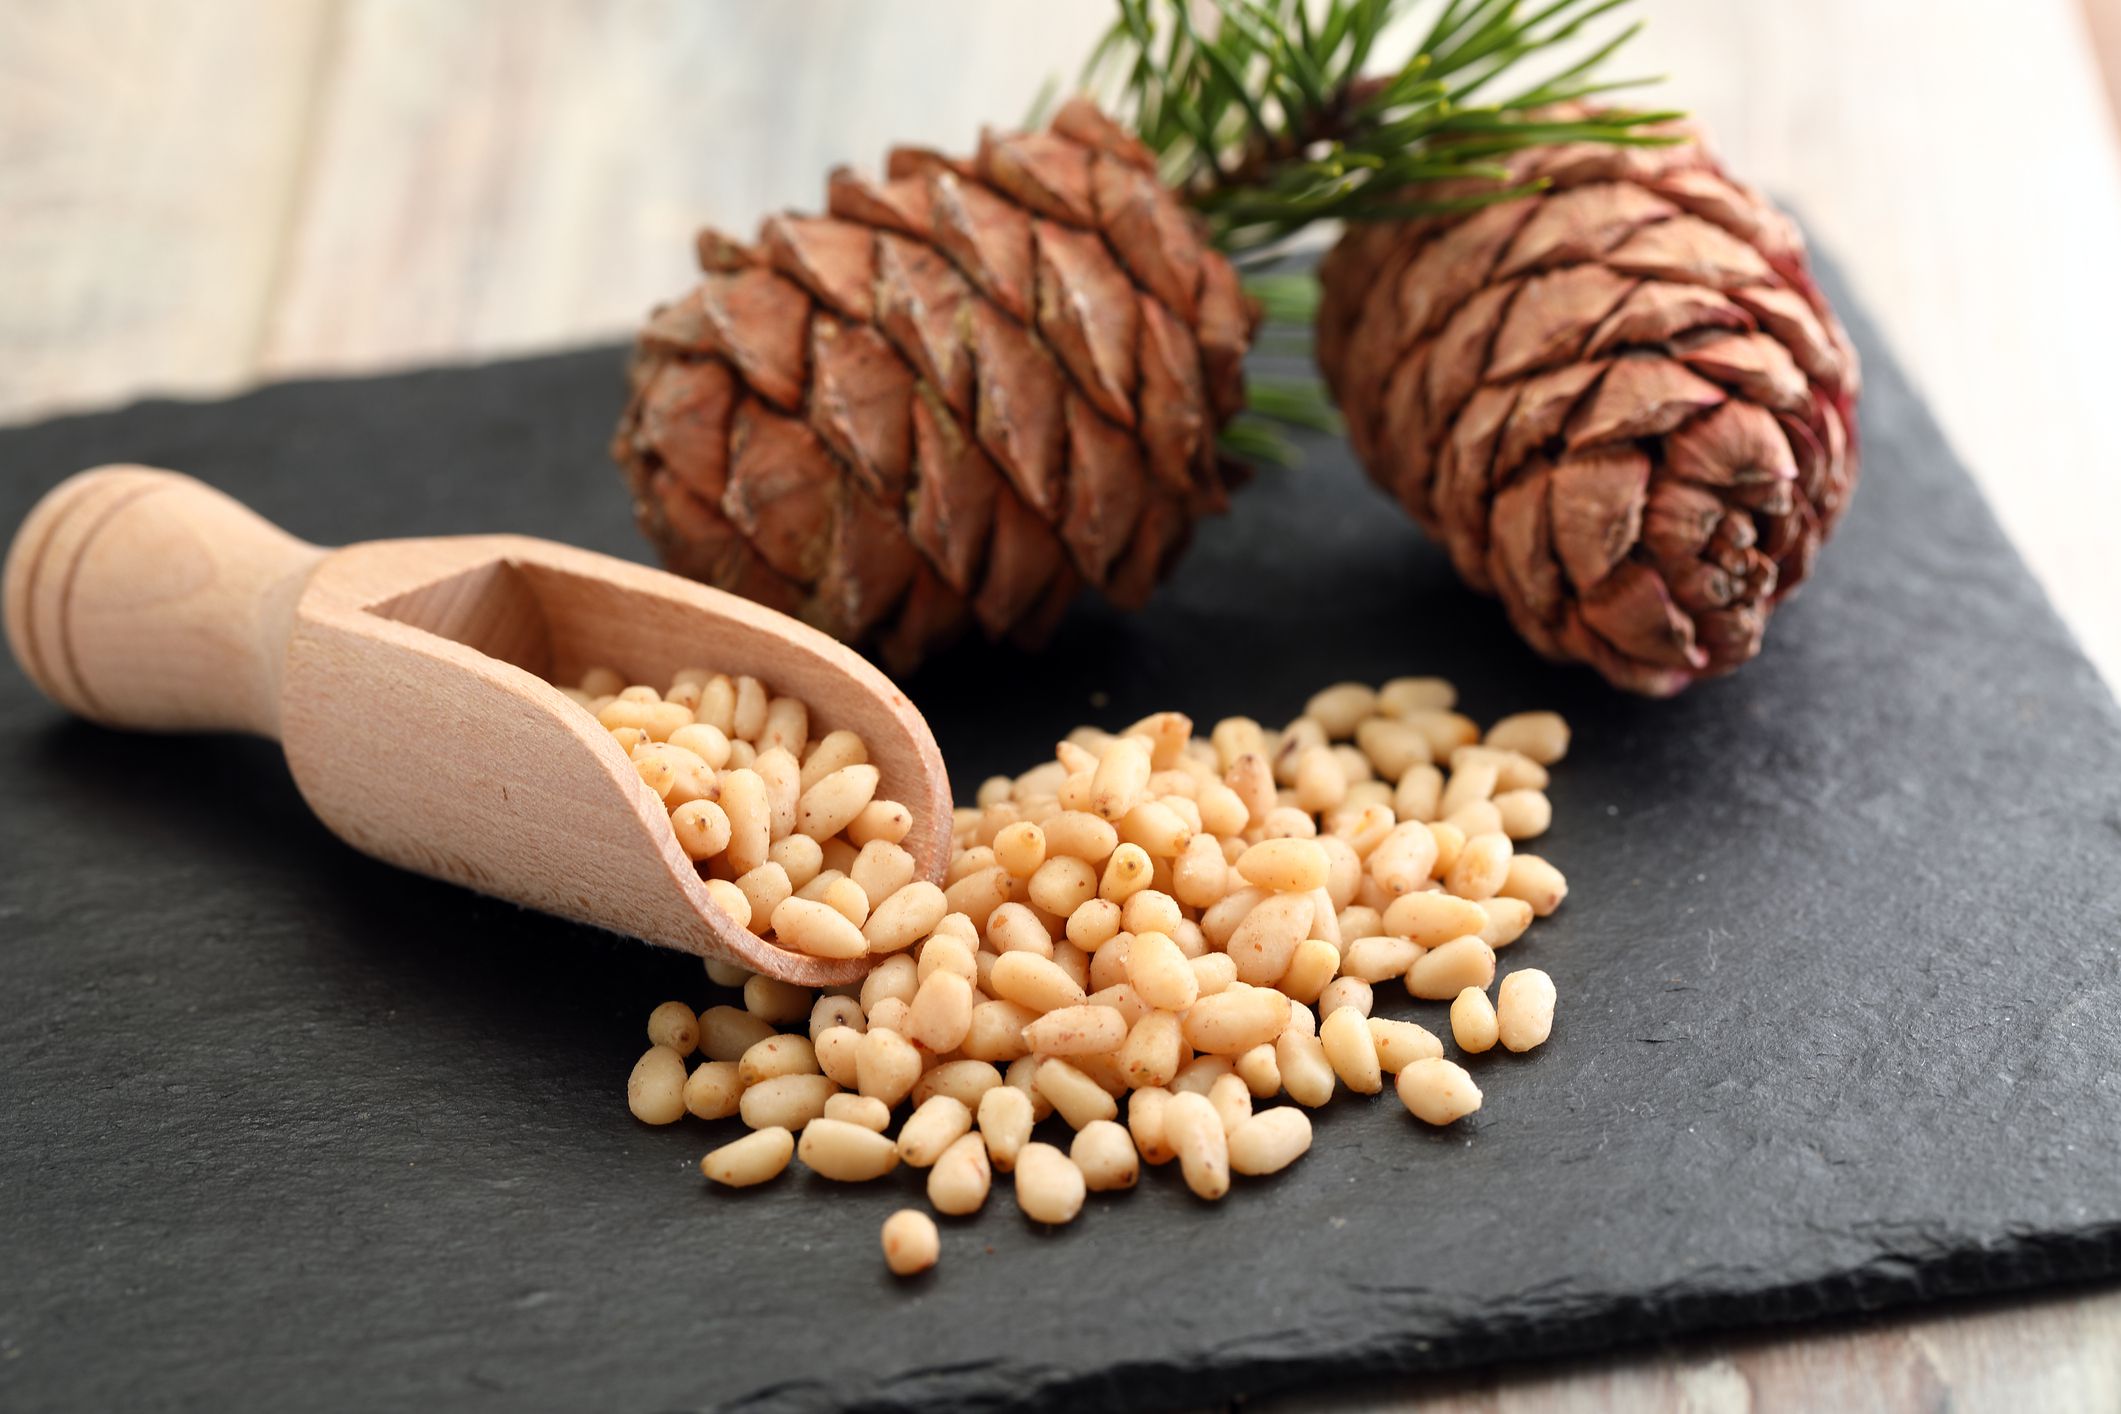 Where Do Pine Nuts Come From?